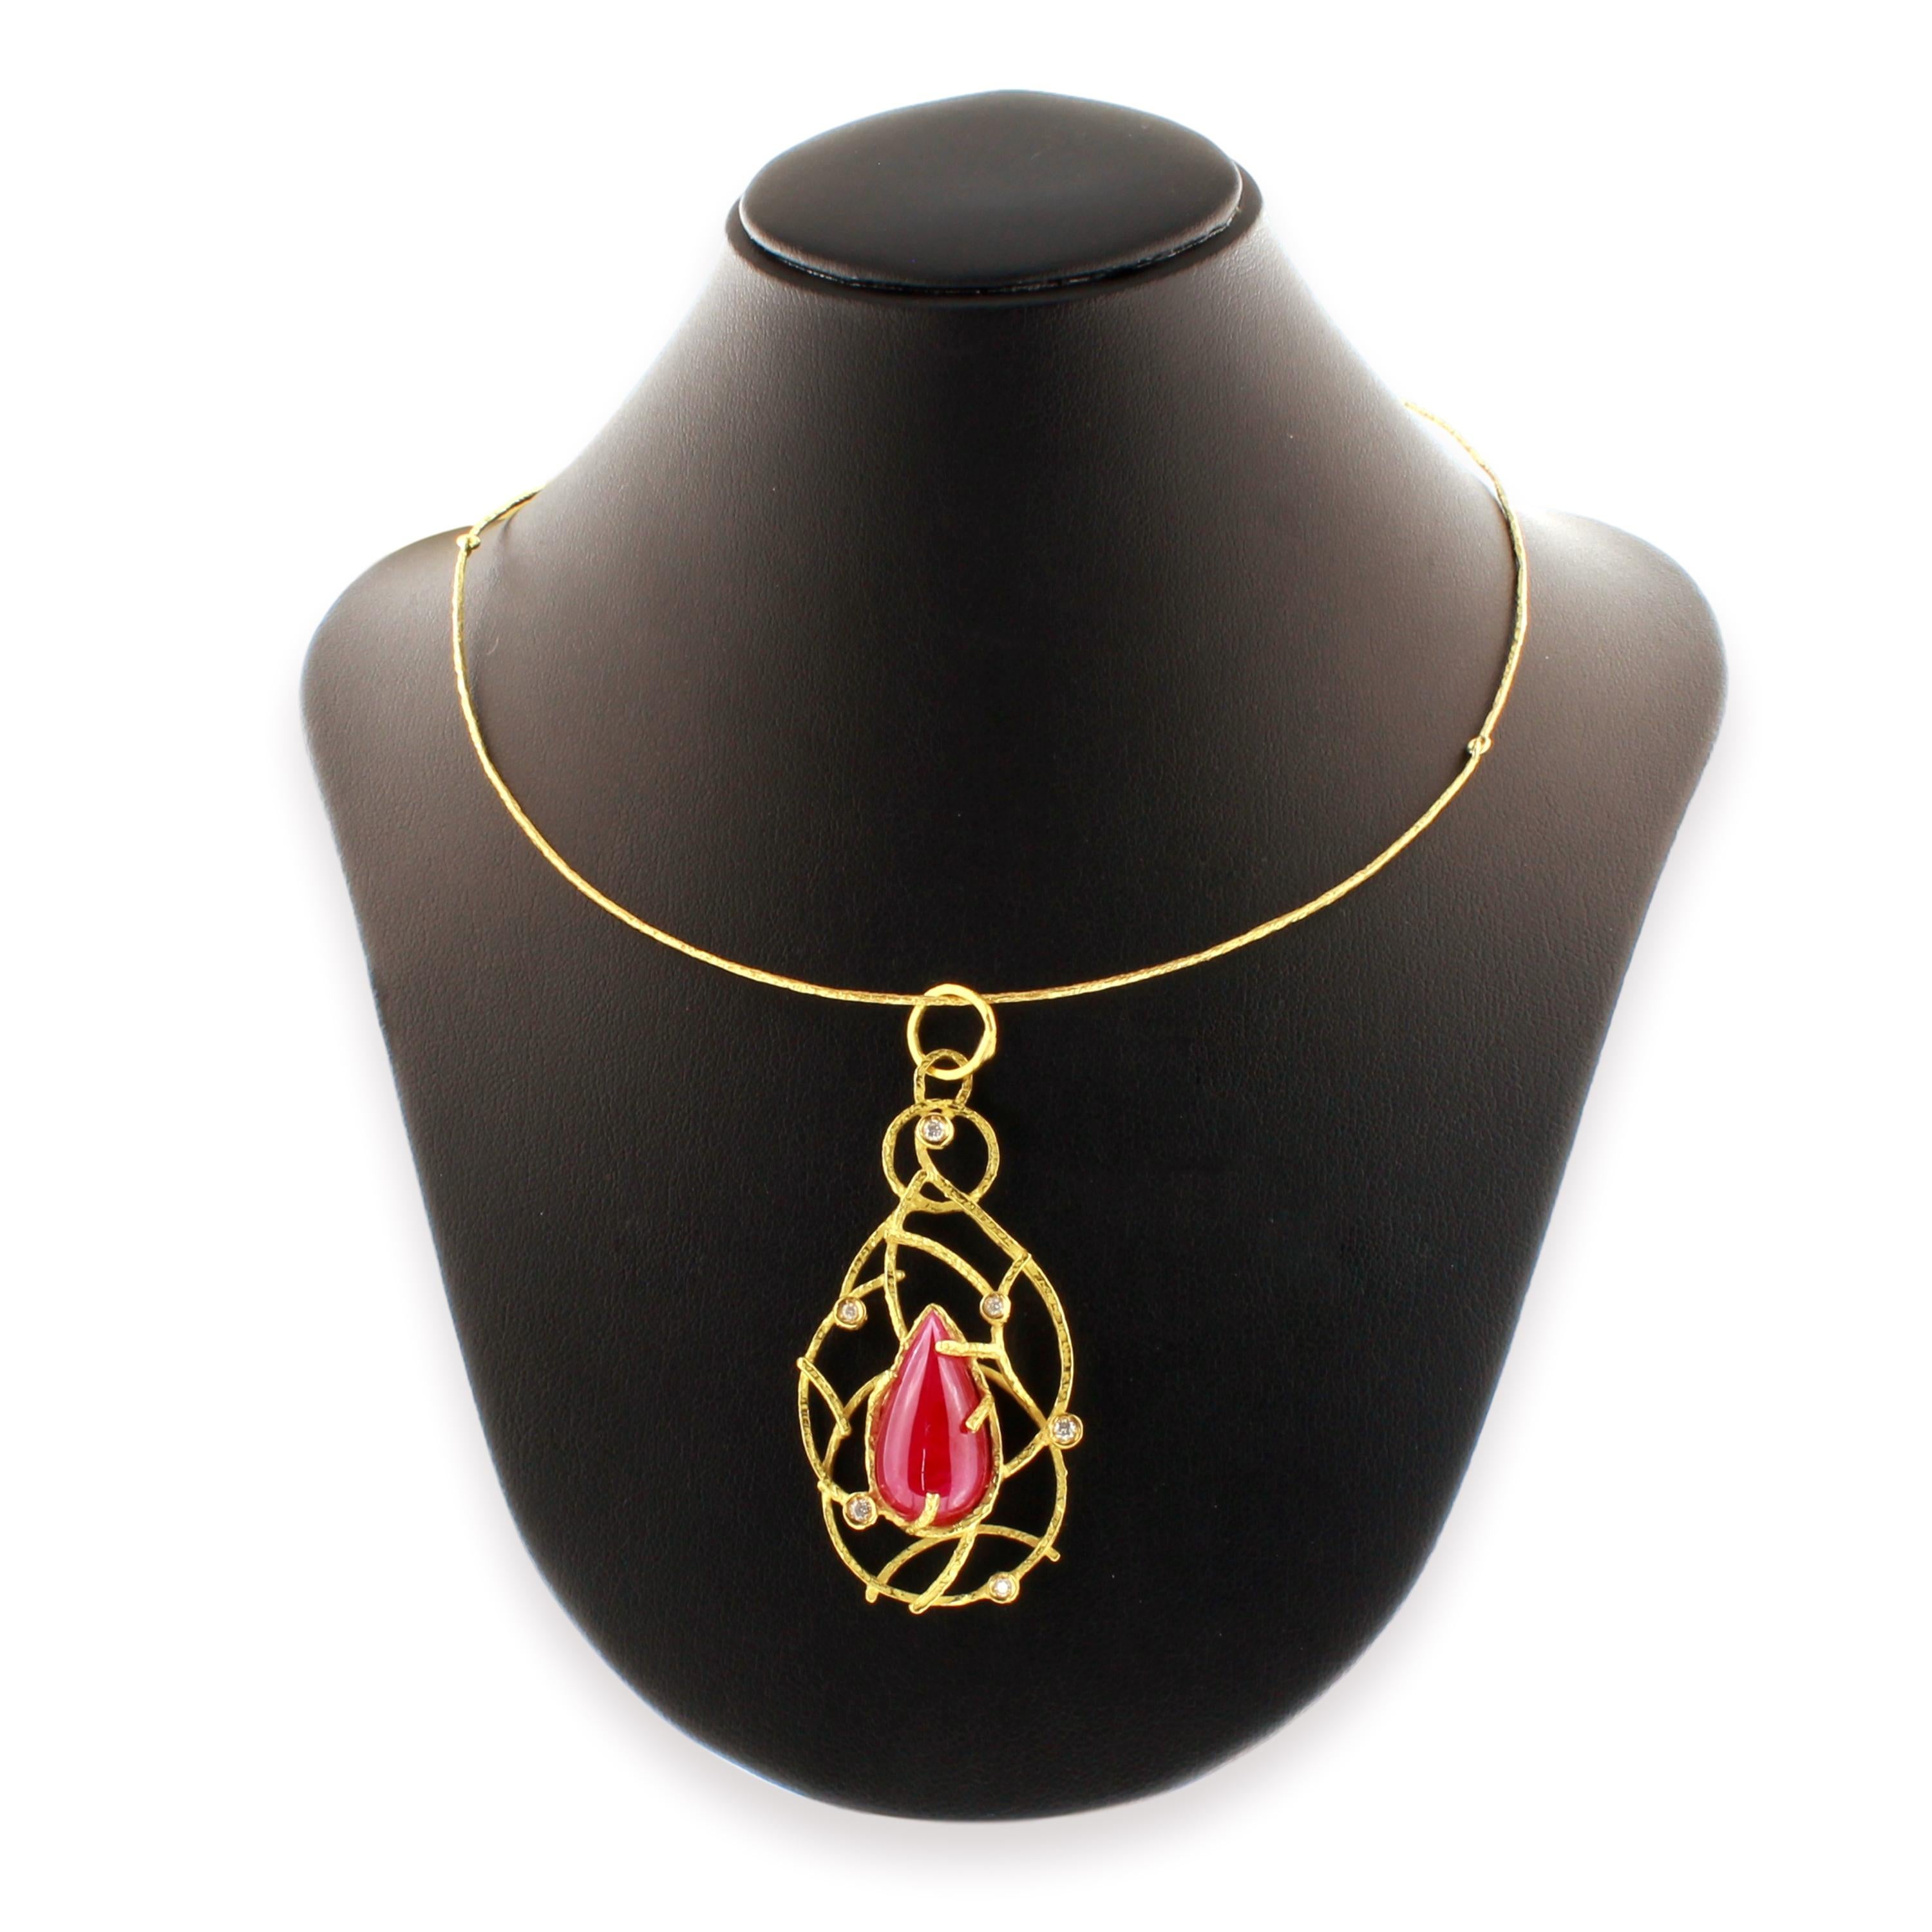 Sacchi 14.5 Carat Ruby and Diamonds Gemstone 18 Karat Gold Pendant Necklace In New Condition For Sale In Rome, IT